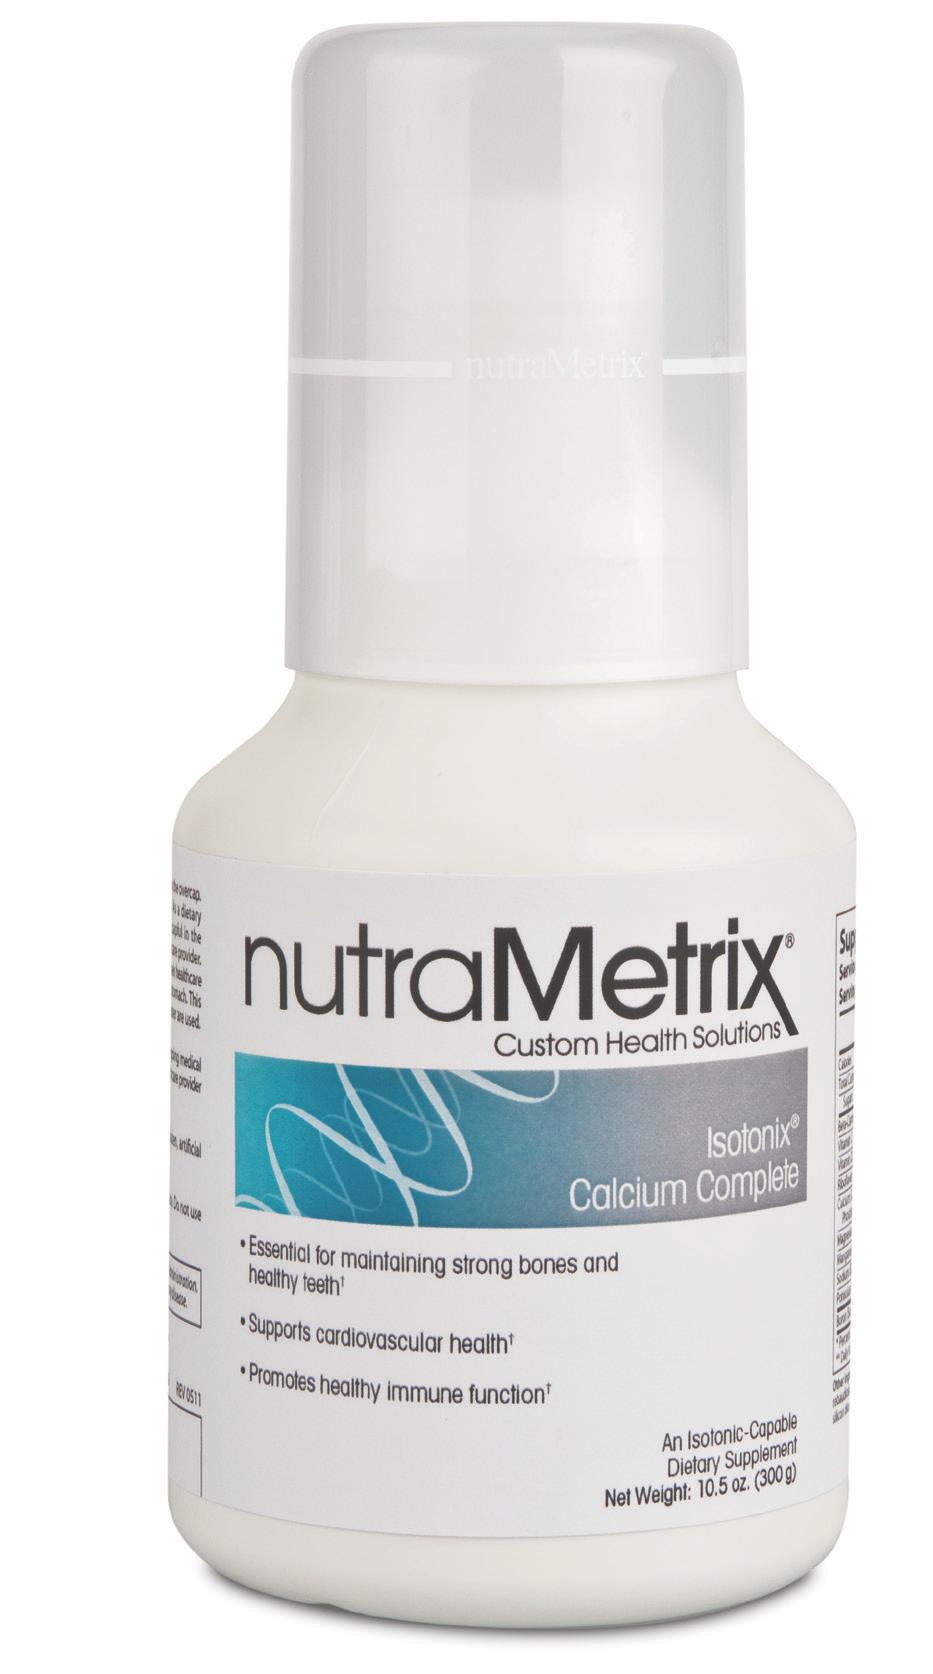 nutrametrix Isotonix Calcium Complete Essential for maintaining strong bones and healthy teeth Supports cardiovascular health Promotes healthy immune function An Isotonic-Capable Dietary Supplement